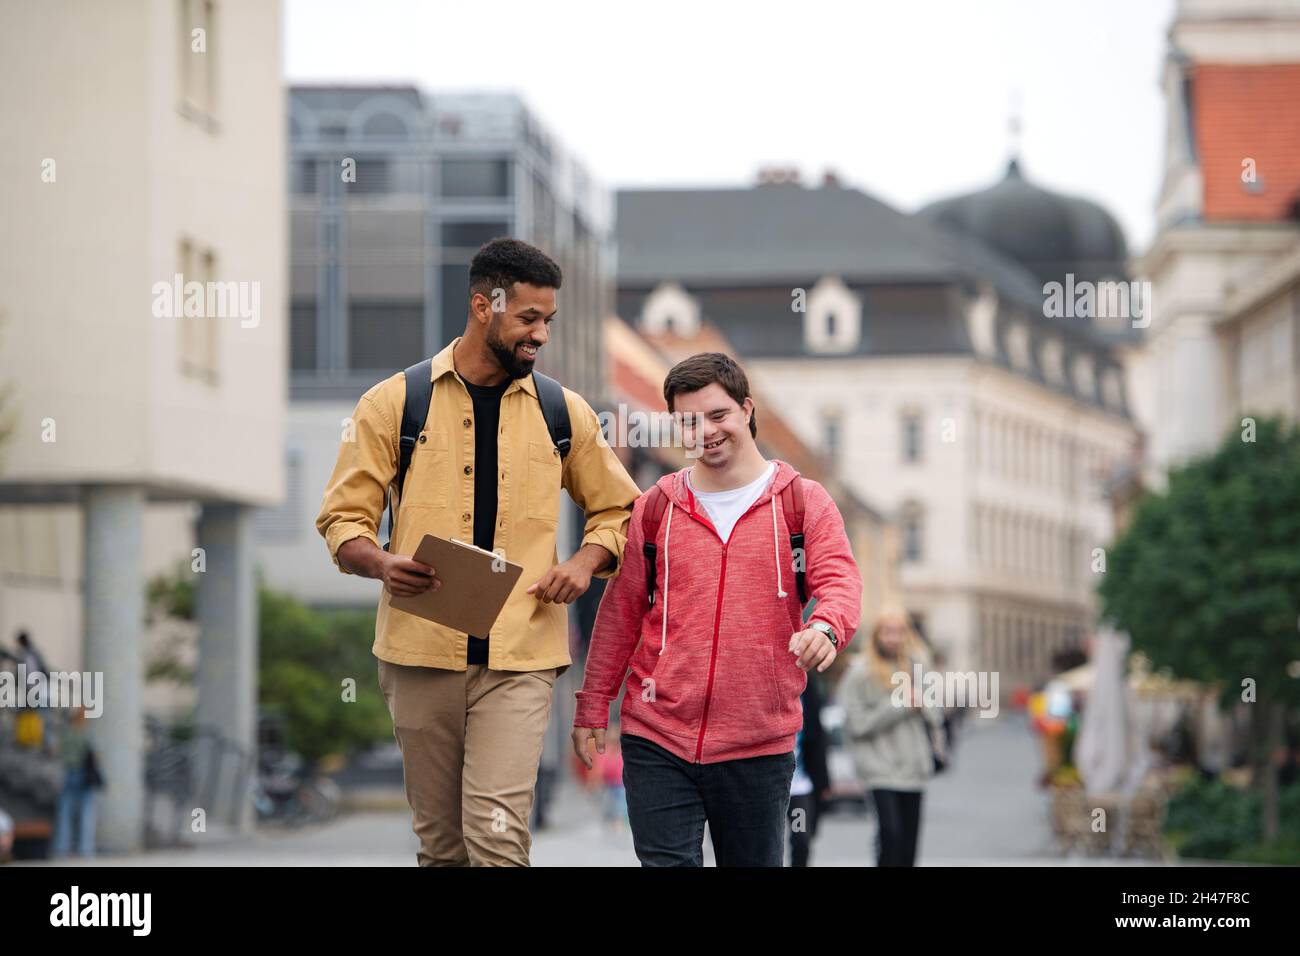 Young man with Down syndrome and his mentoring friend walking and talking outdoors Stock Photo